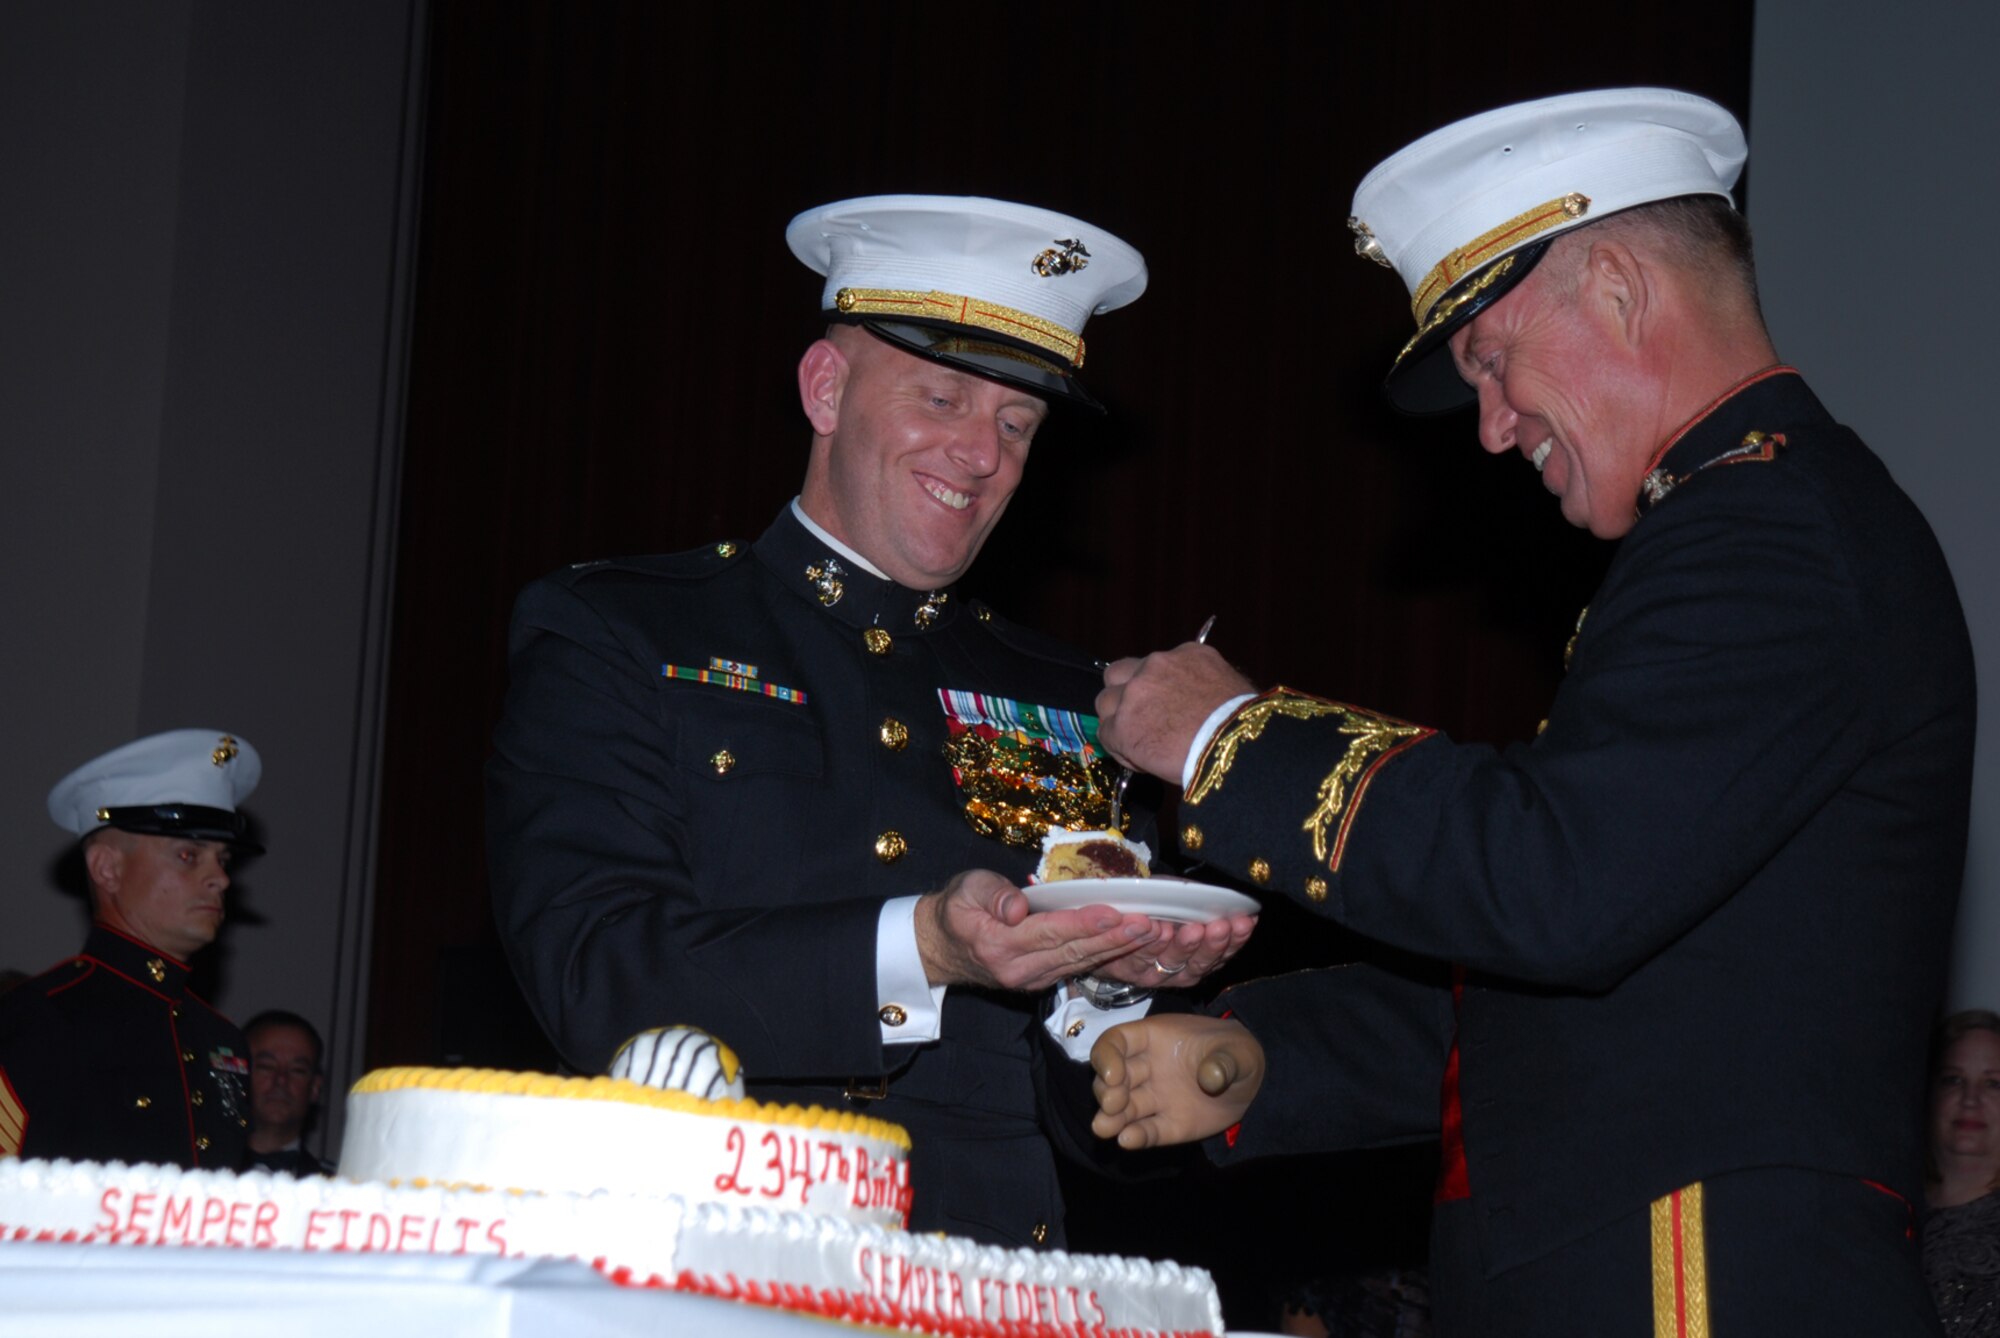 SAN ANGELO, Texas -- Retired Marine Col. Timothy Howard, Deputy Chief of Staff, Intelligence Marine Forces Pacific, receives the first piece of cake at the 234th Marine Corps Birthday Ball hosted by the Marine Corps Detachment, Goodfellow Air Force Base, Nov. 7, 2009. The first piece of cake is given to the guest of honor, the second to the oldest Marine present. Upon receiving the second piece of cake, the oldest Marine will in turn pass it on to the youngest Marine present, signifying the passing of experience and knowledge from the old to the young of the Corps. (U.S. Air Force photo/Staff Sgt. Laura R. McFarlane)
